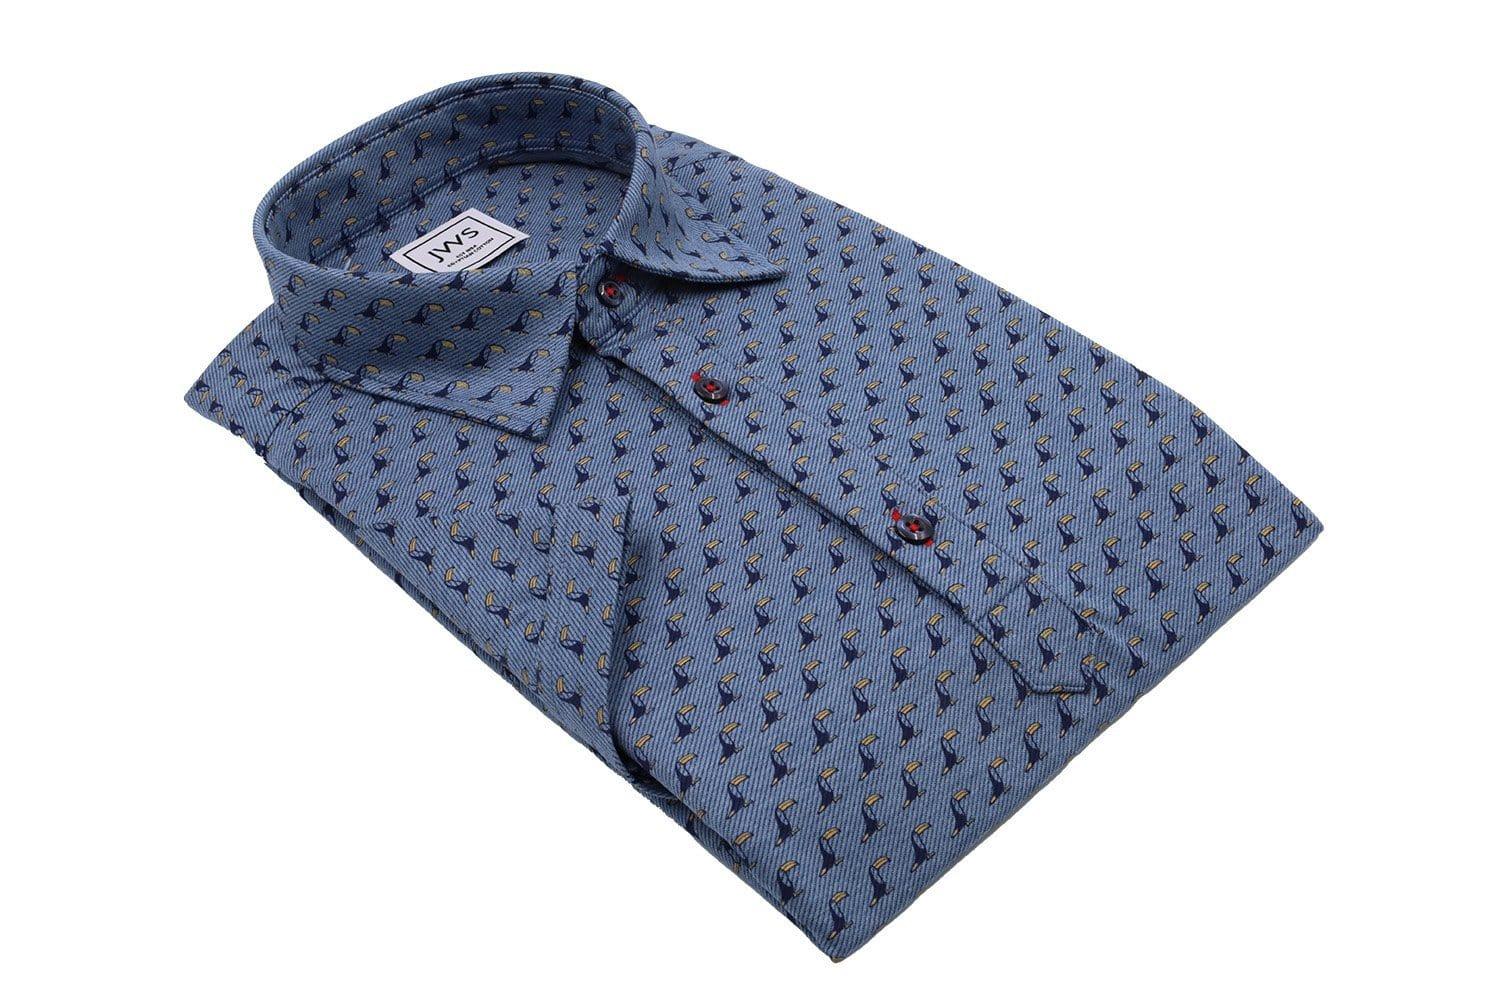 Printed Bird Design on a Blue Twill Knit Polo Shirt - Just White Shirts